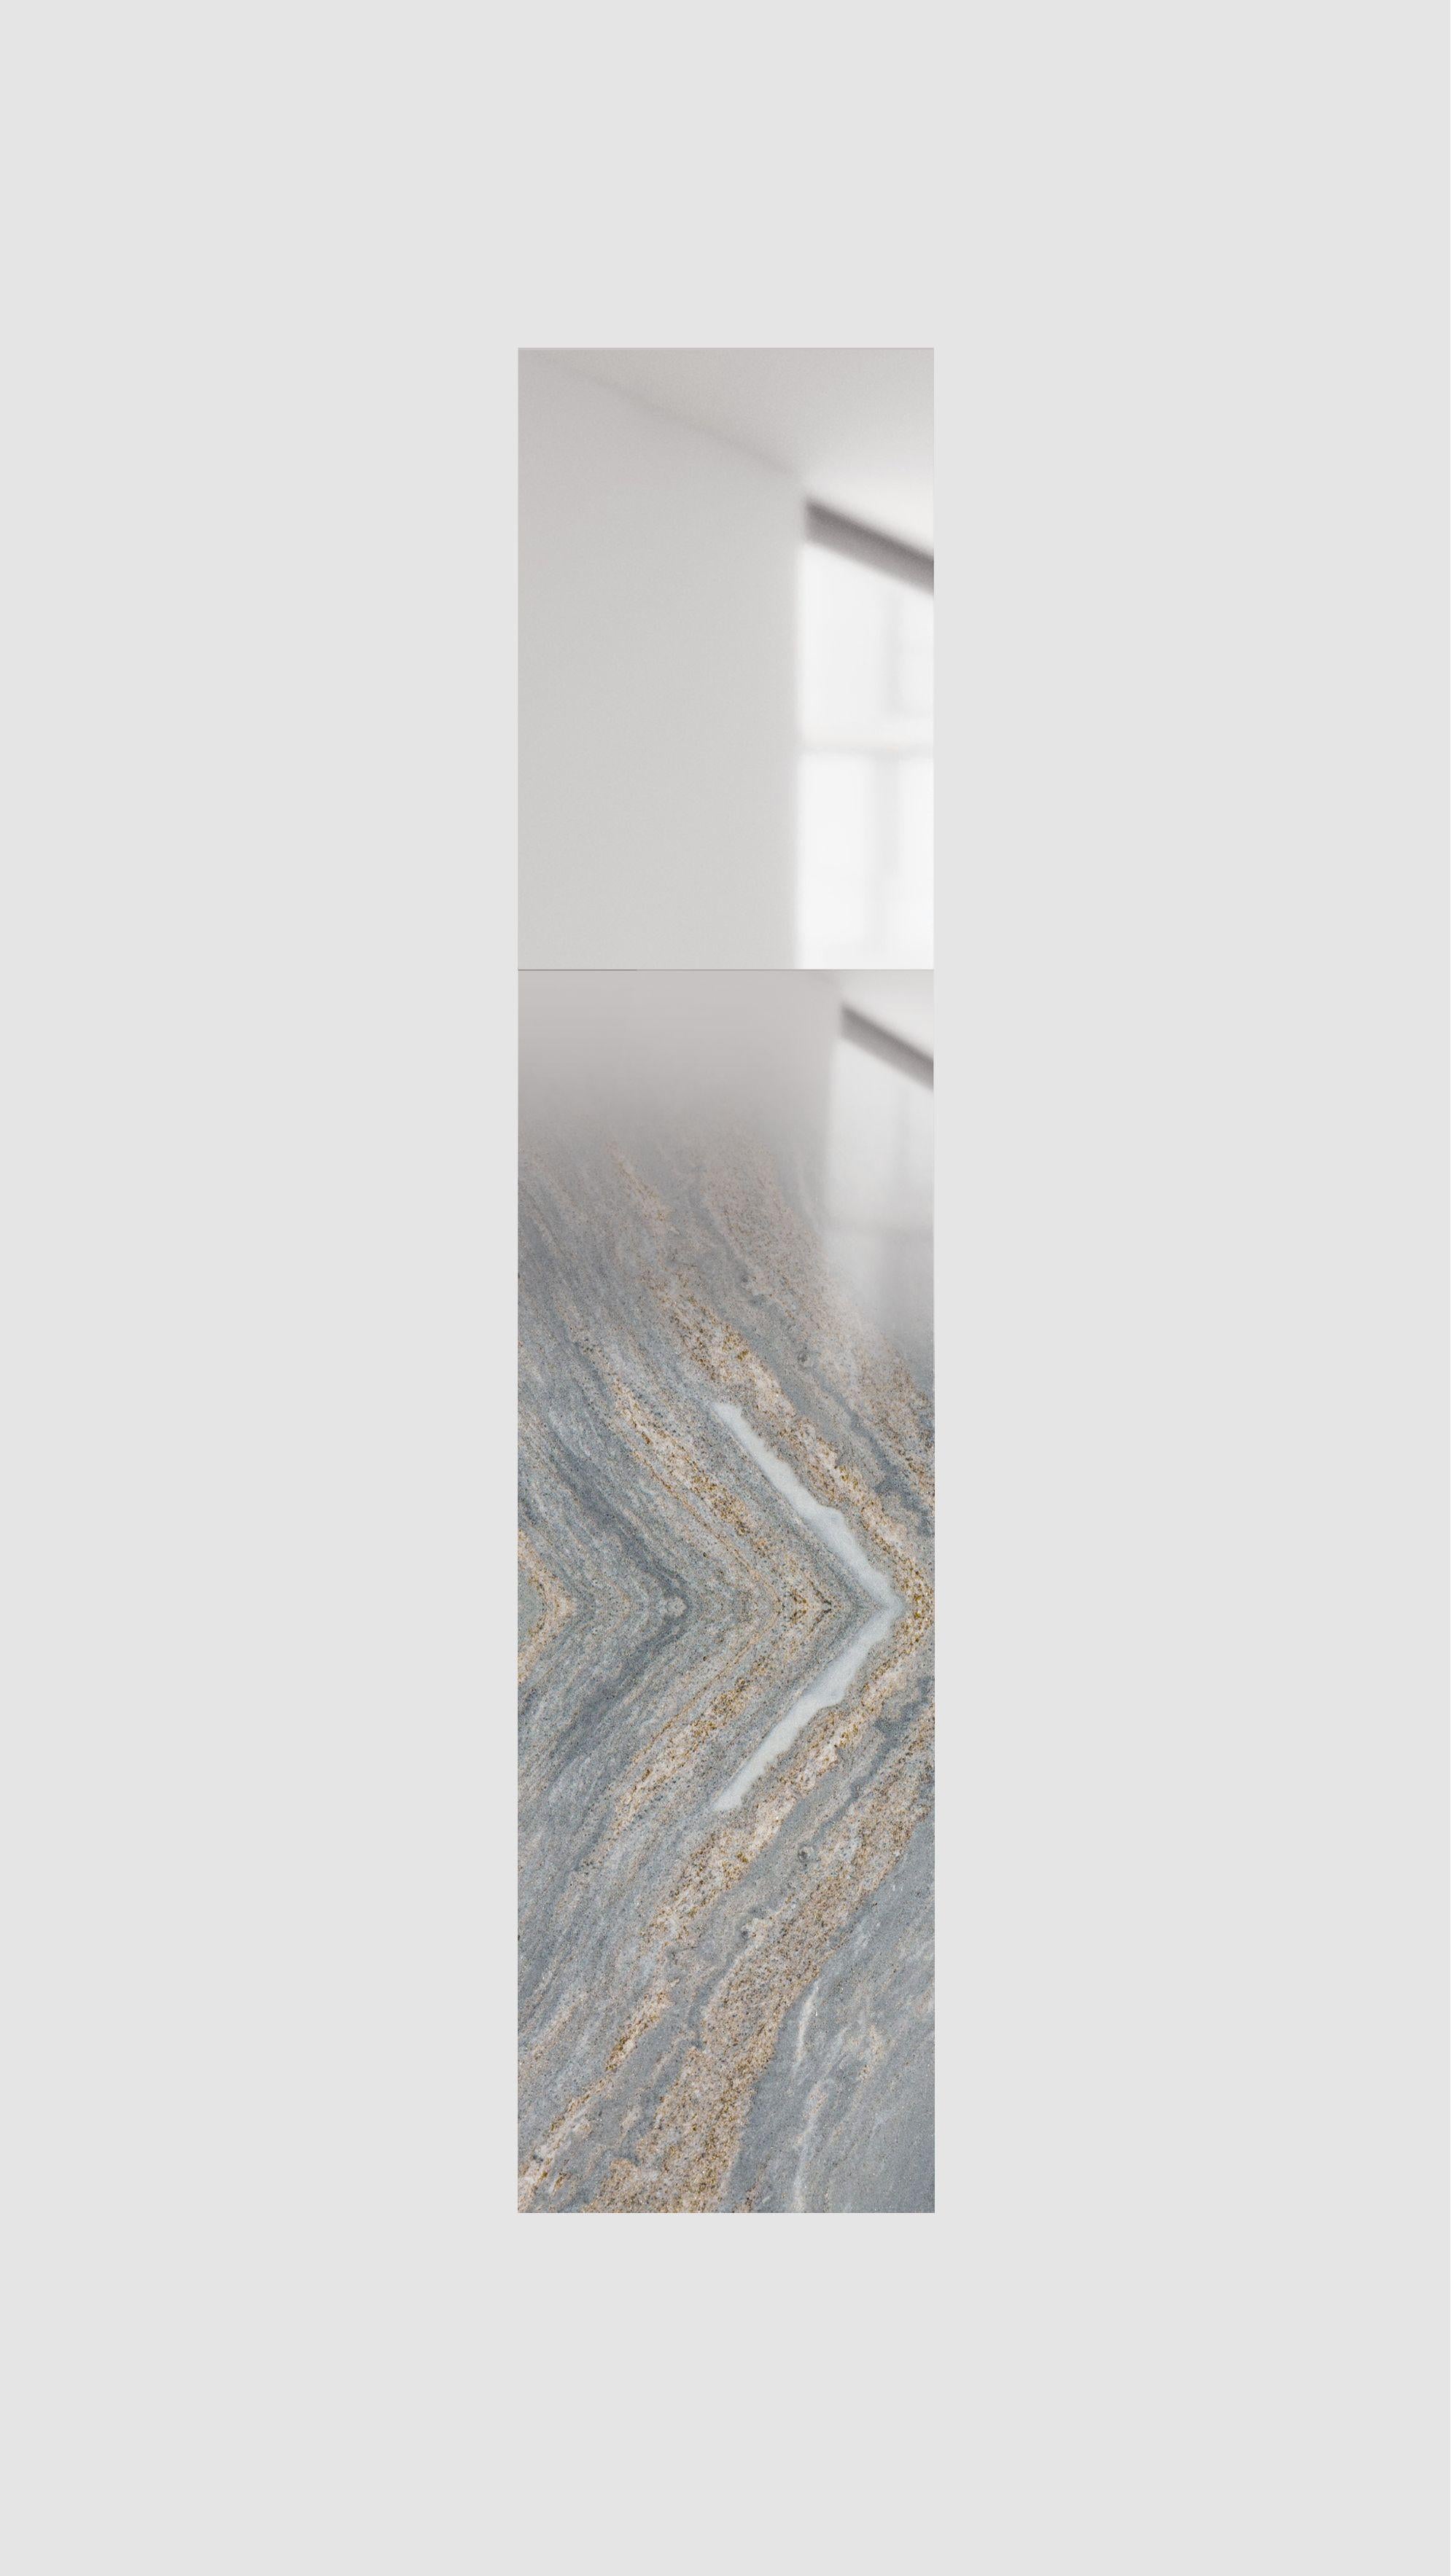 Fading marble mirror by Formaminima
Limited Edition
Dimensions: 14 x 35 x H 157.5 cm
Materials: Delabrè solid brass, fading polished finish / Extra-thin solid Palissandro Blu Nuvolato marble, hand-ground crystal layering with fading mirror finish